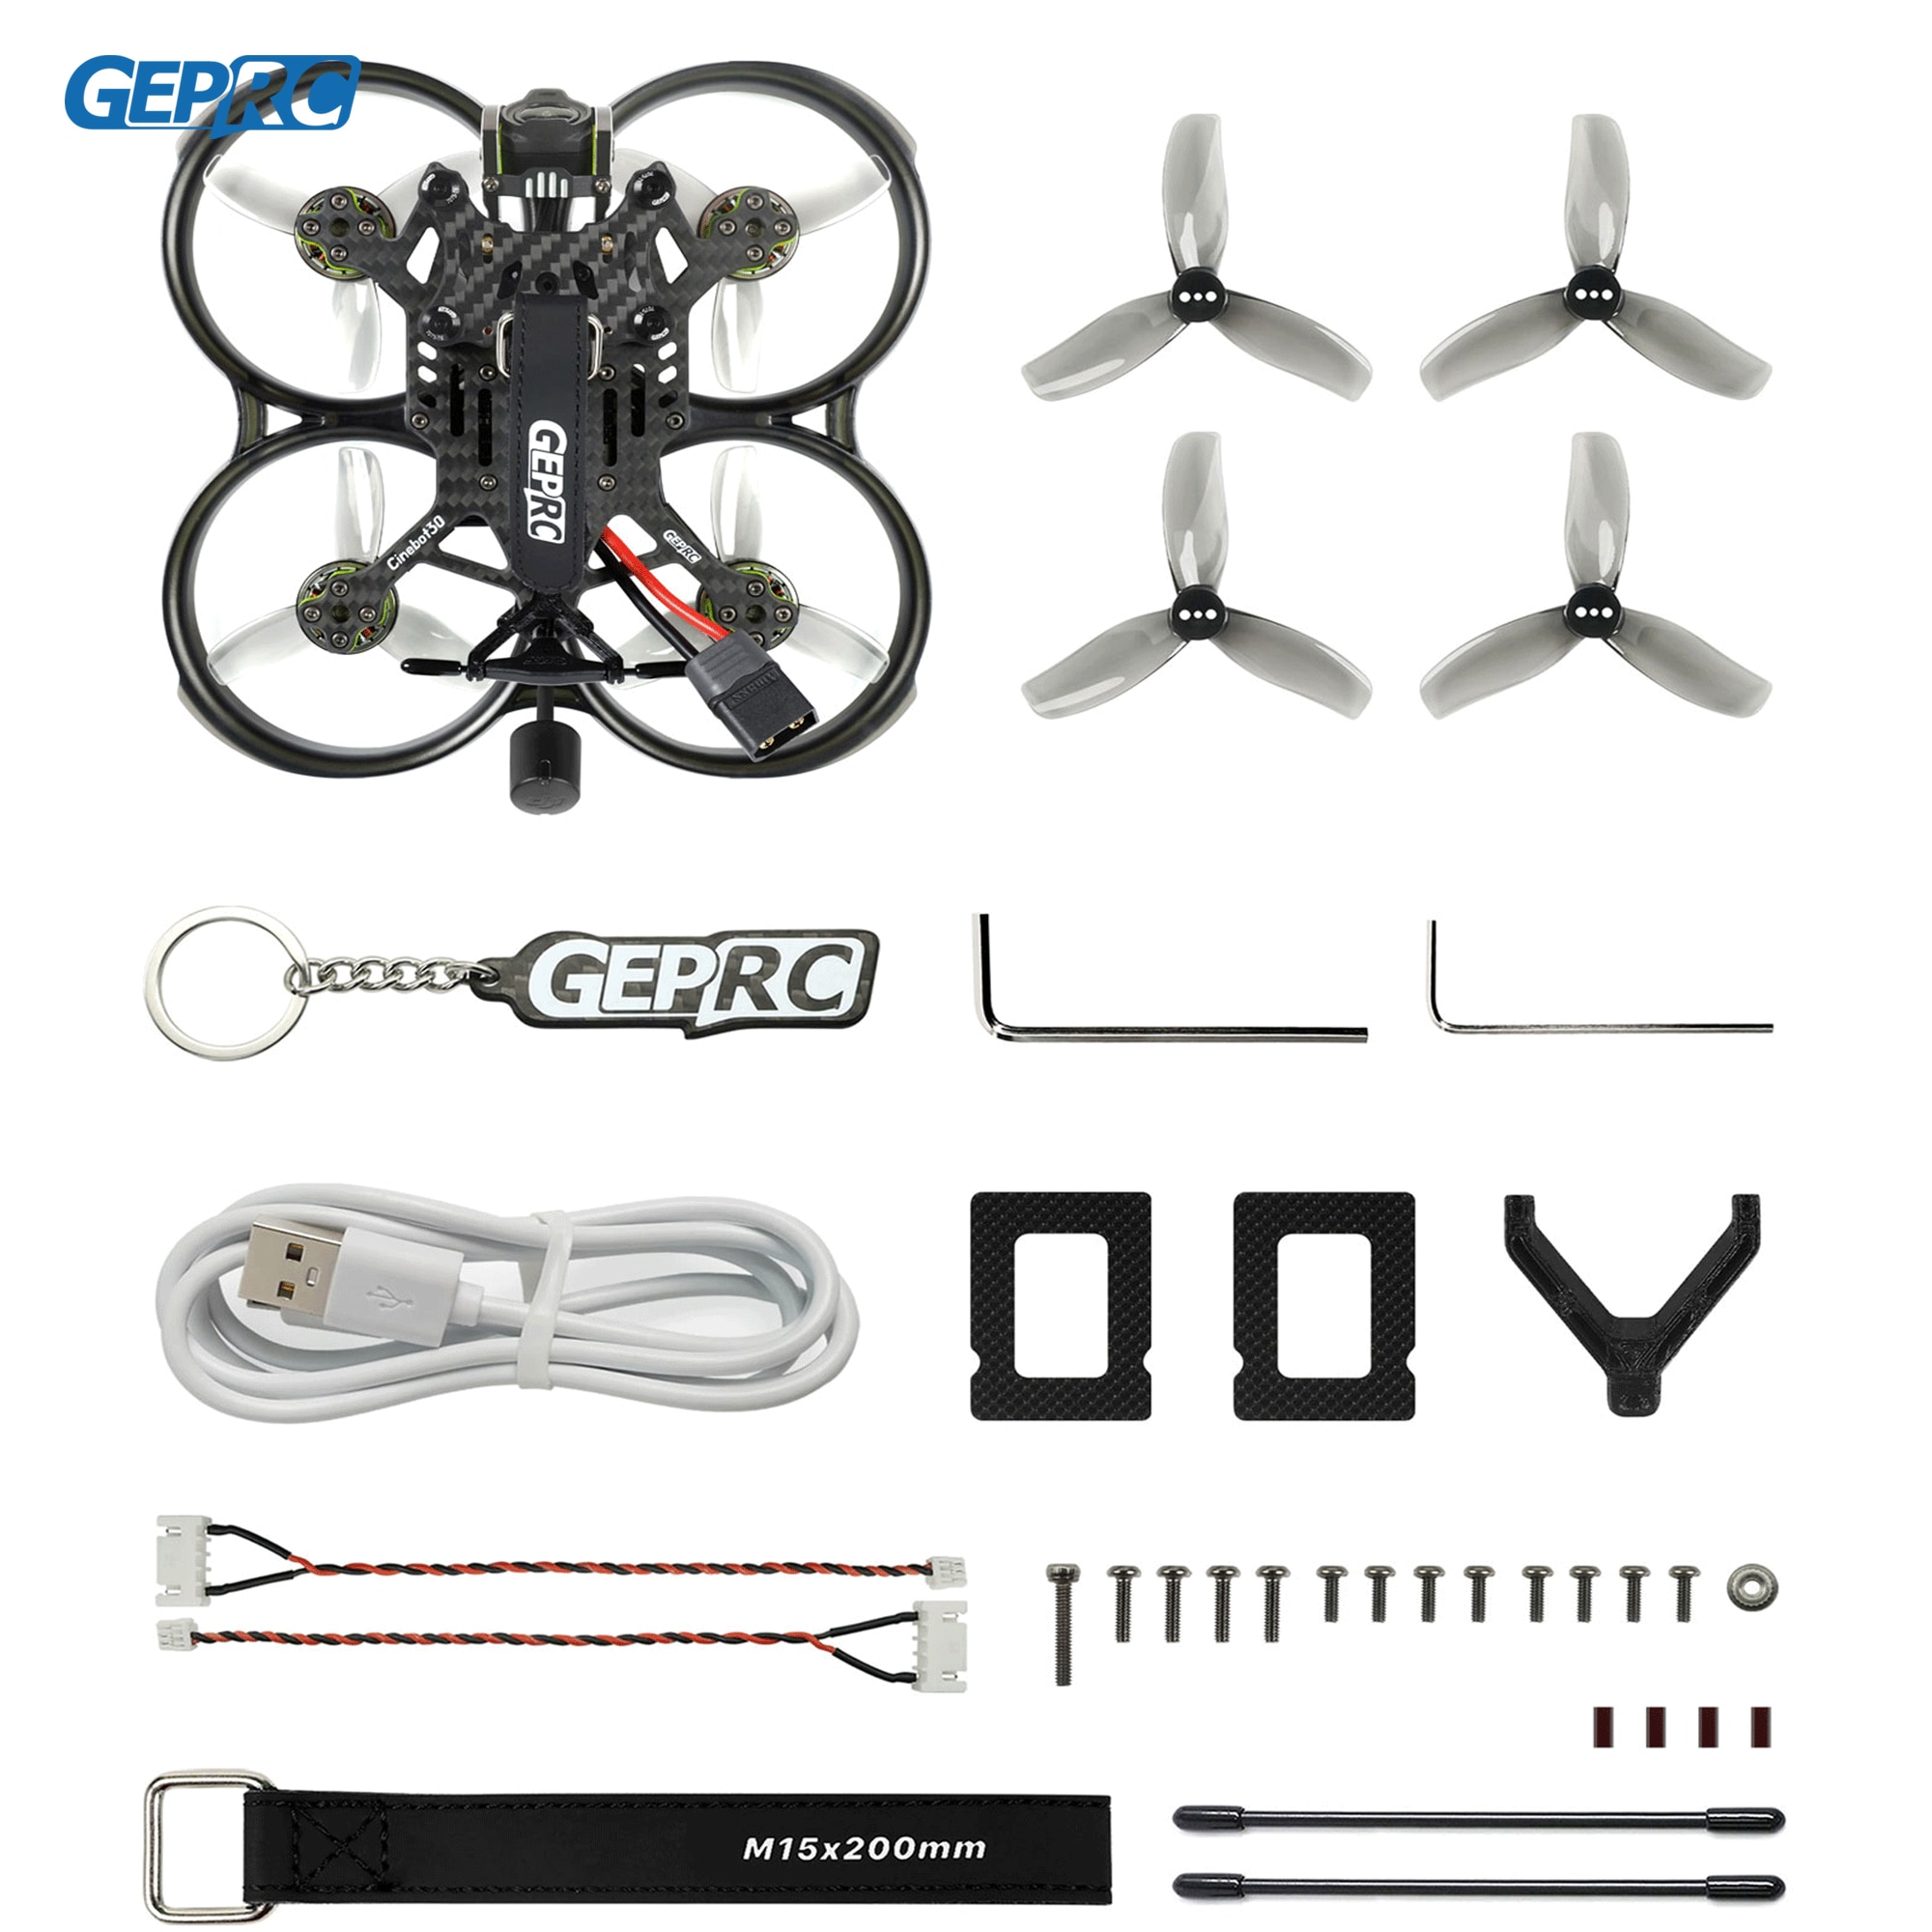 GEPRC Cinebot30 HD O3 FPV Quadcopter